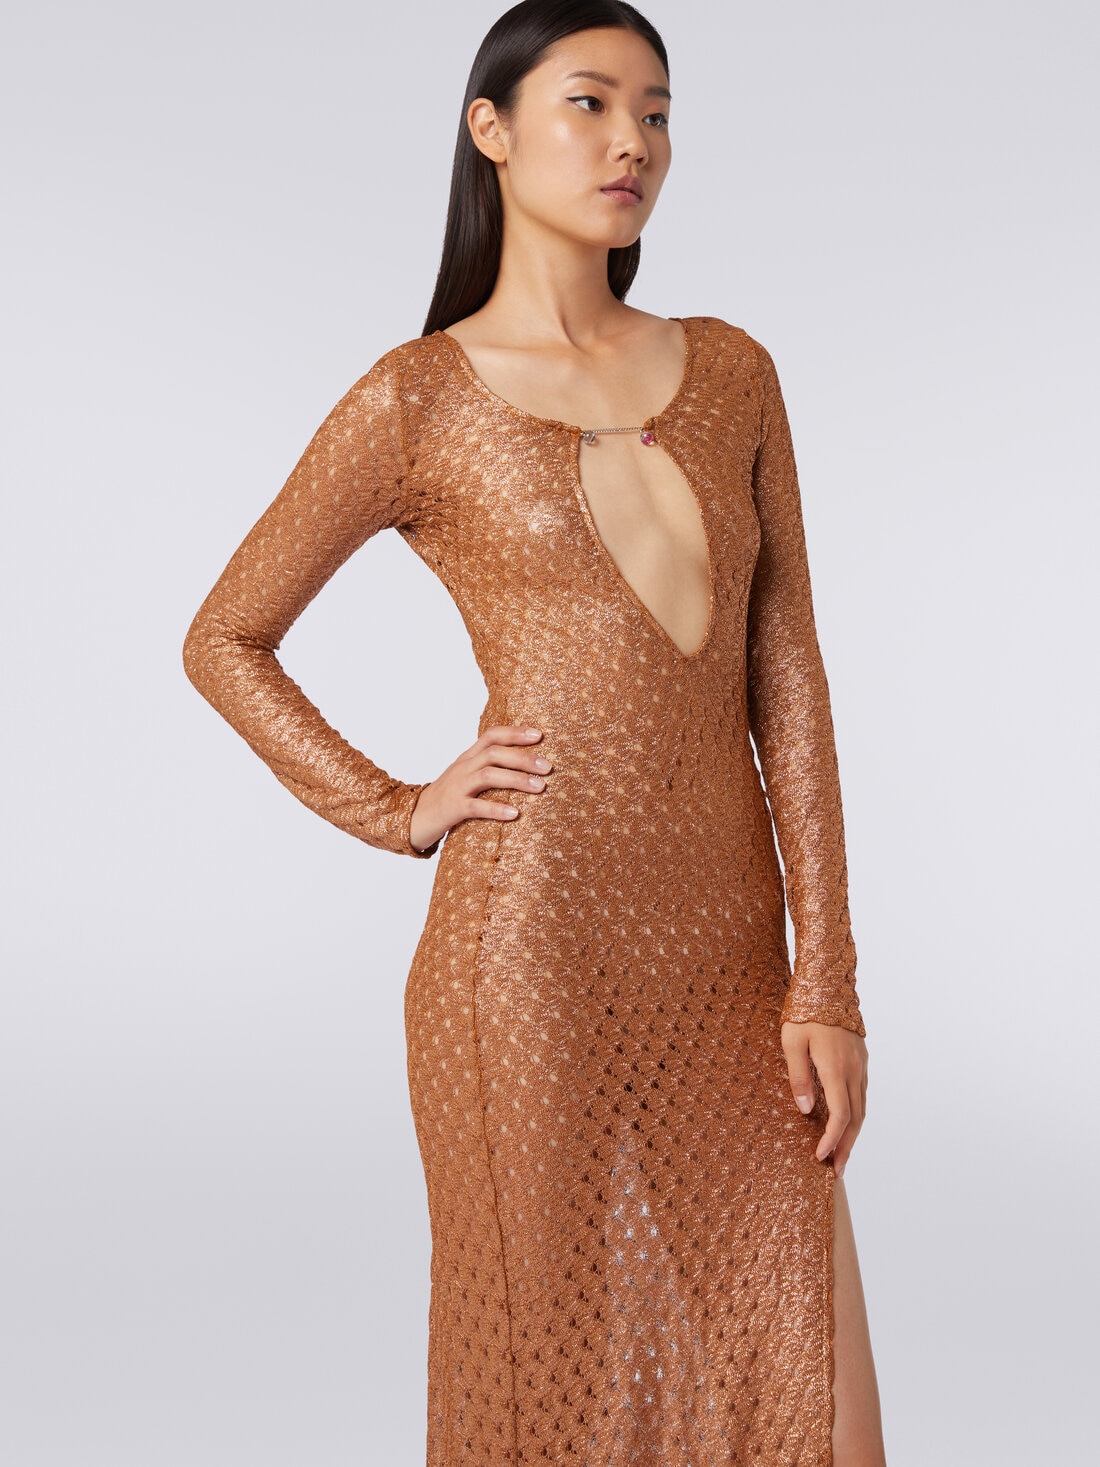 Long lace-effect dress with V neckline and appliqués, Brown - MS24SQ01BR00TC71052 - 4